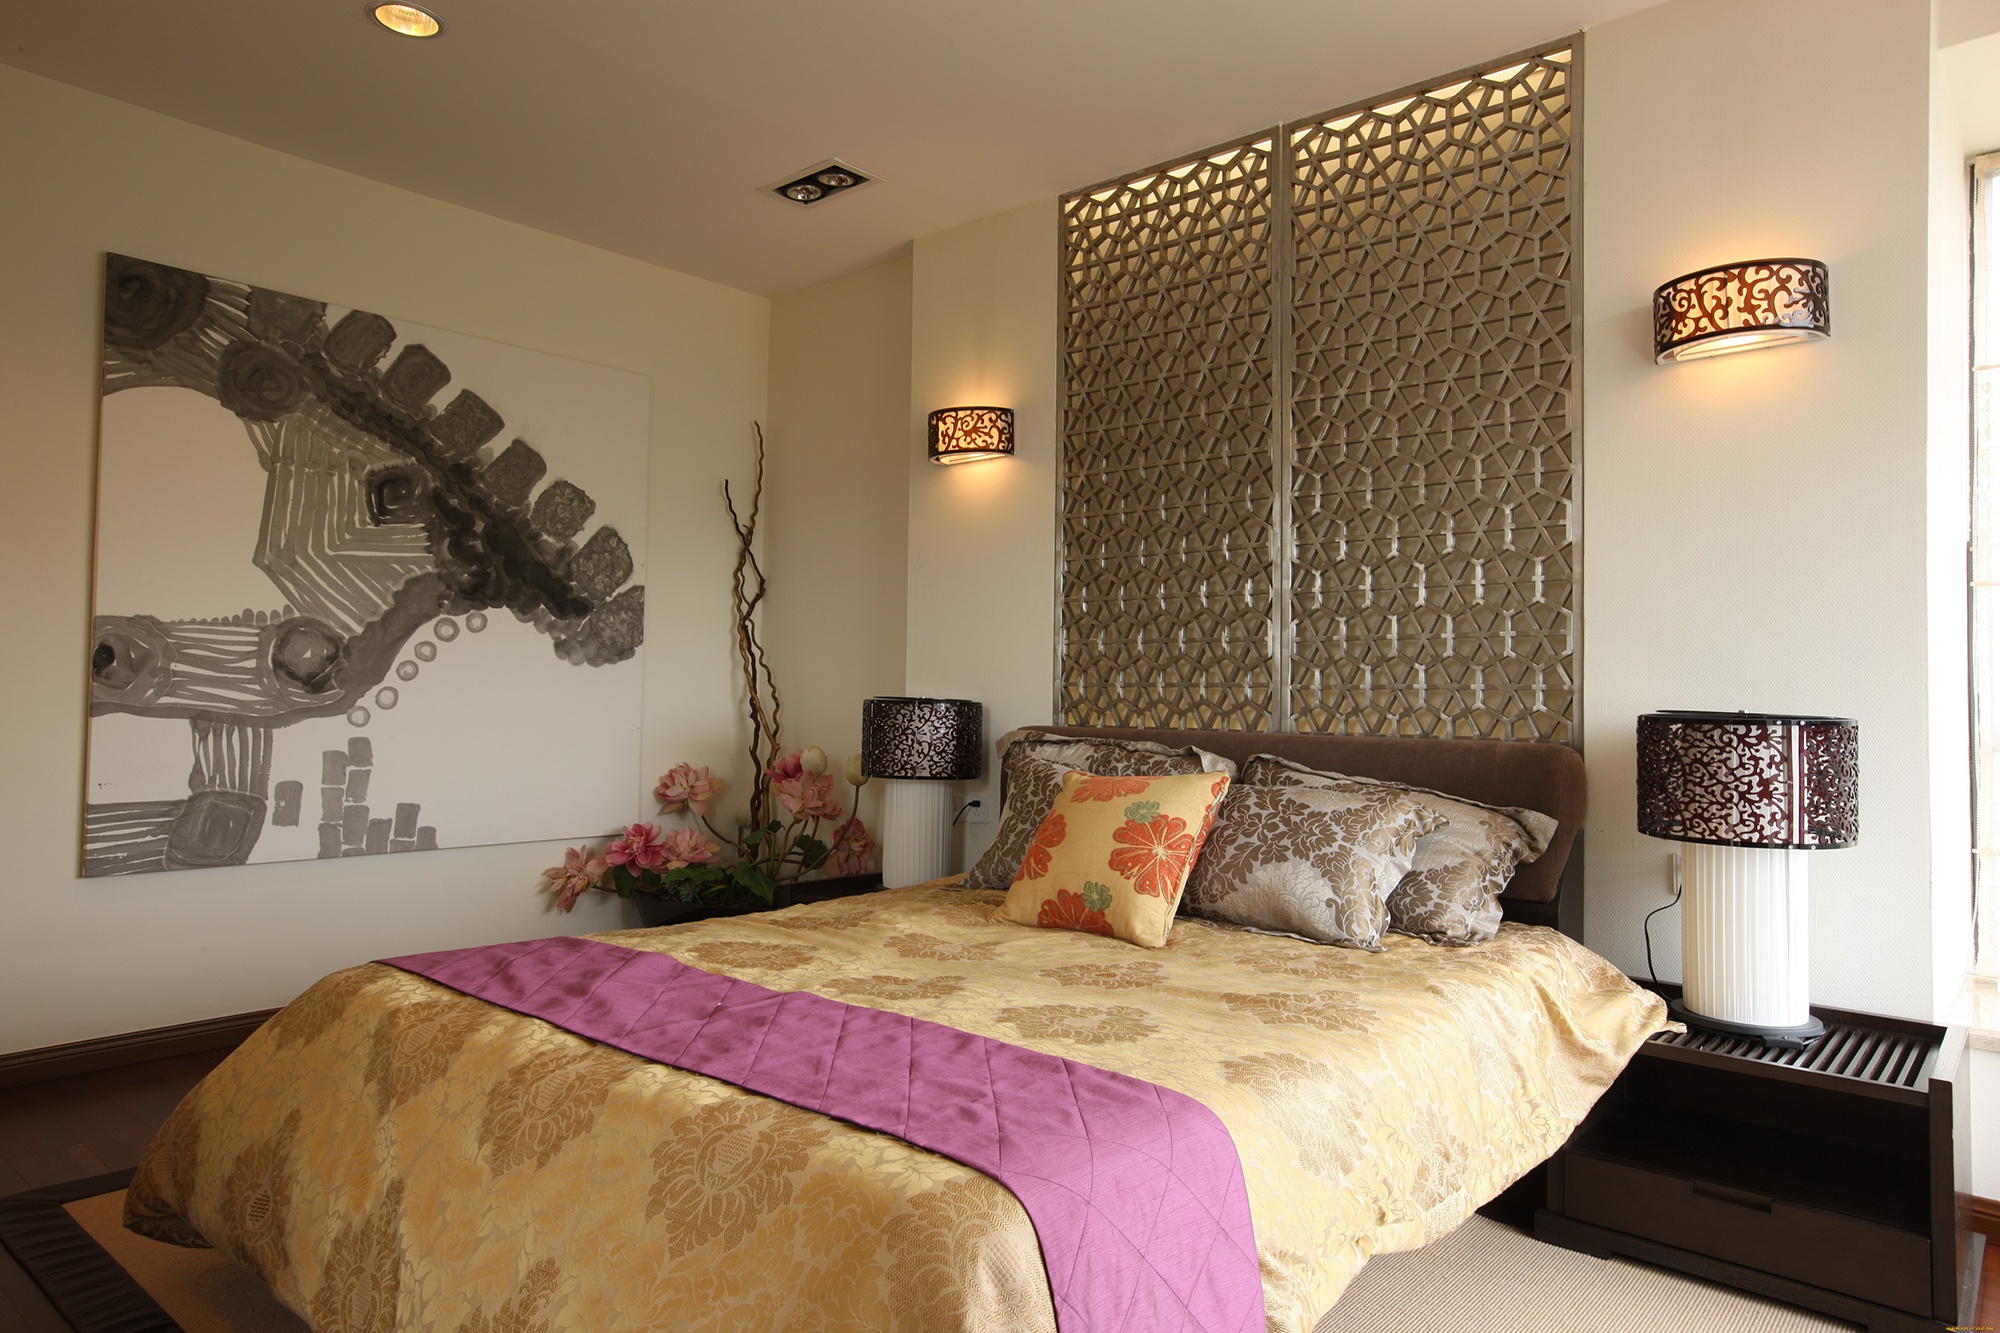 sconces in the bedroom over the bed interior ideas